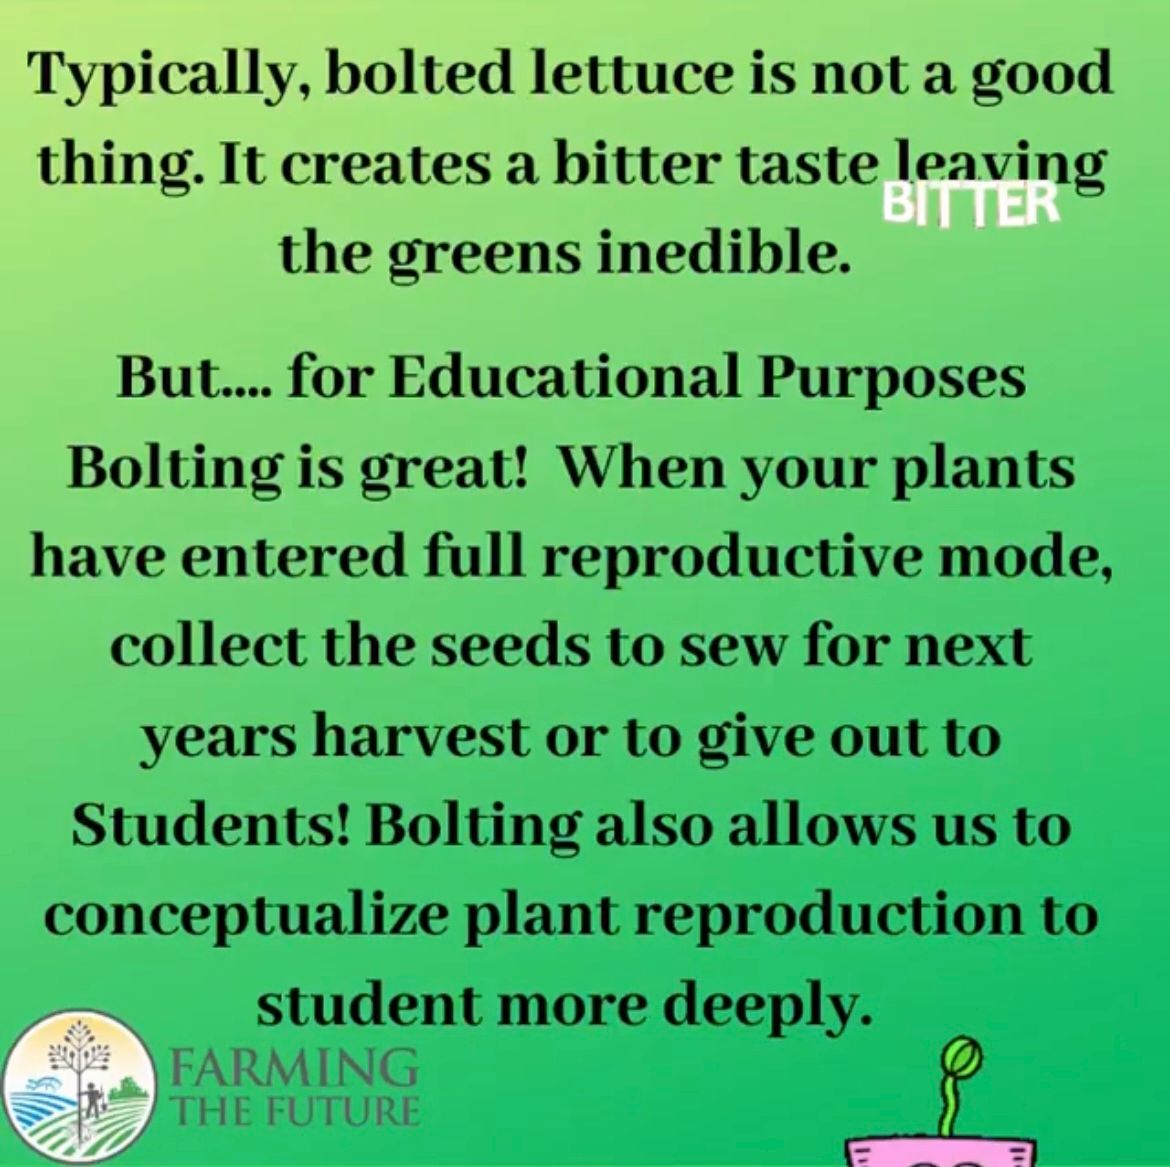 'Watch your dreams sprout and flourish with today's Grow Tip Tuesday! 🌱#educateteachers #farming #schoolgardens